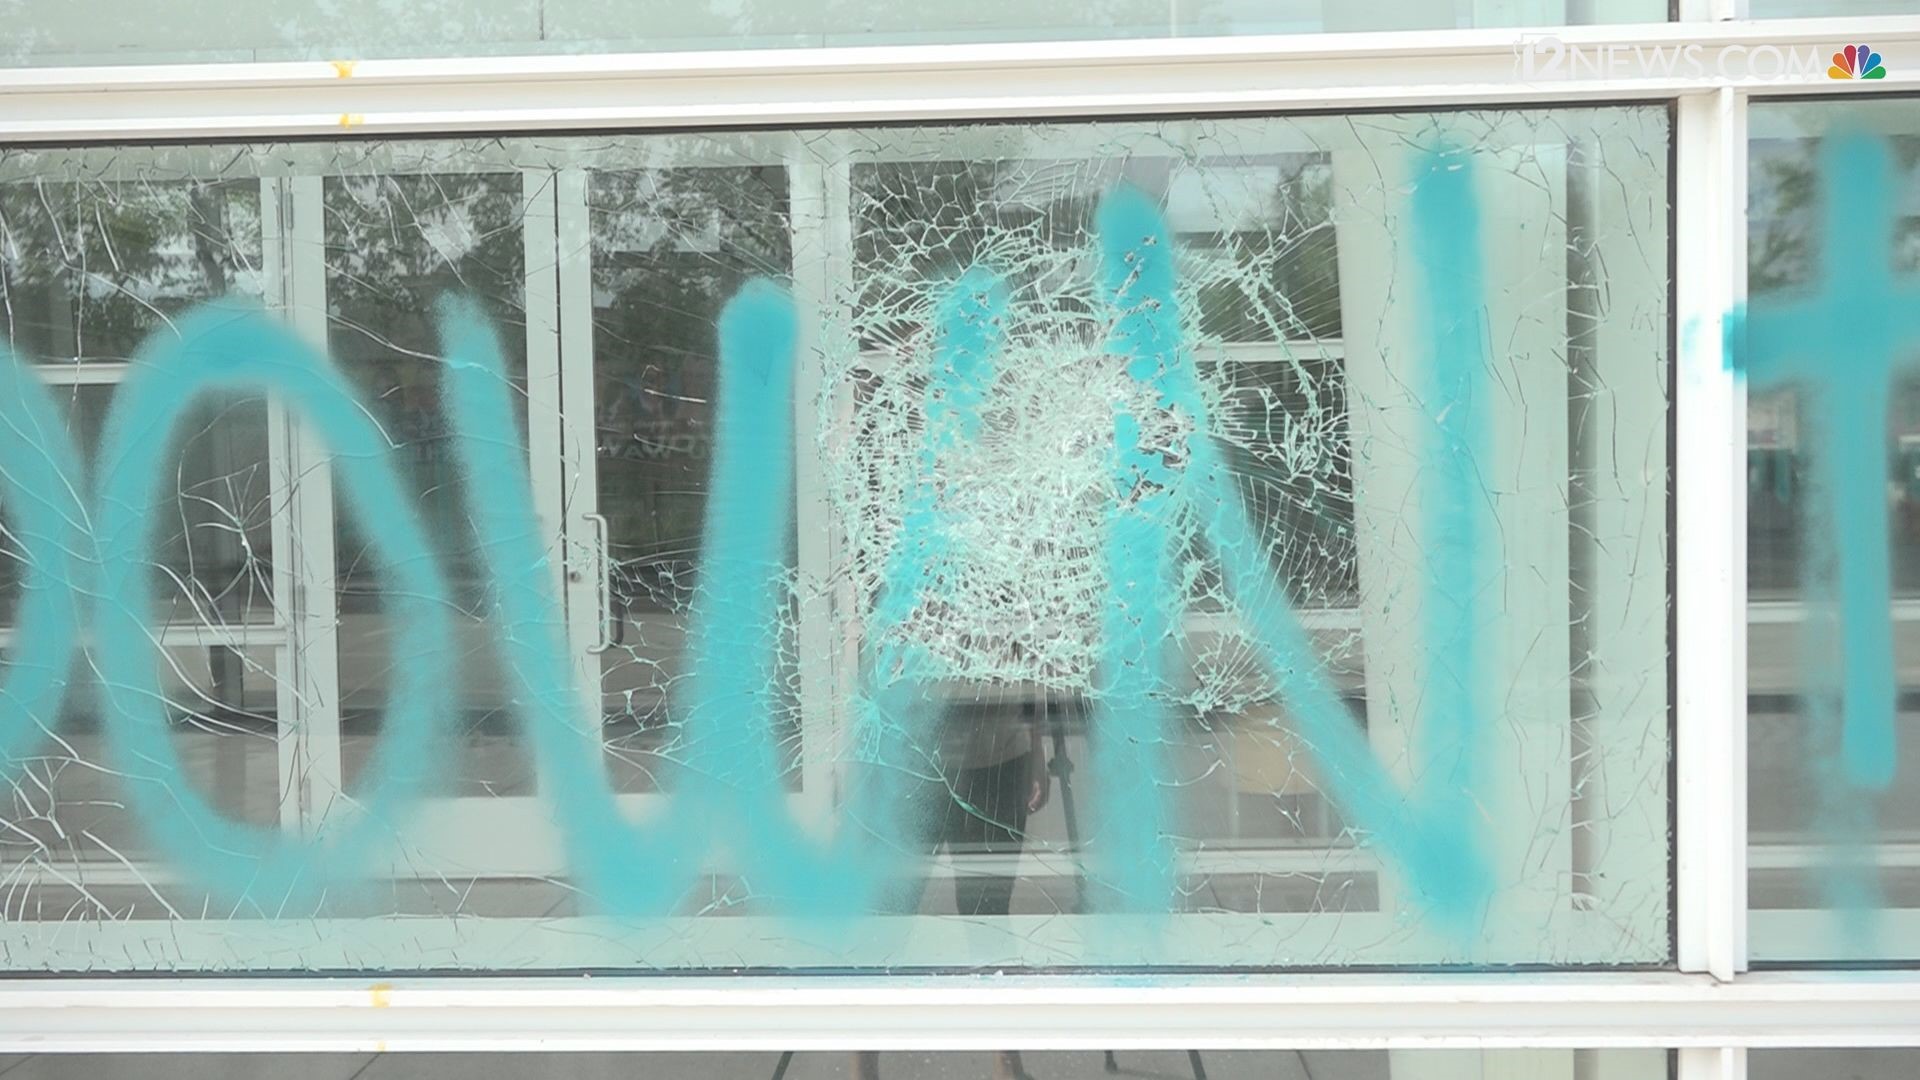 Protestors in Downtown Phoenix damaged 18 properties Friday night into early Saturday morning. Crews came out Saturday to clean up the damage vandals left behind.